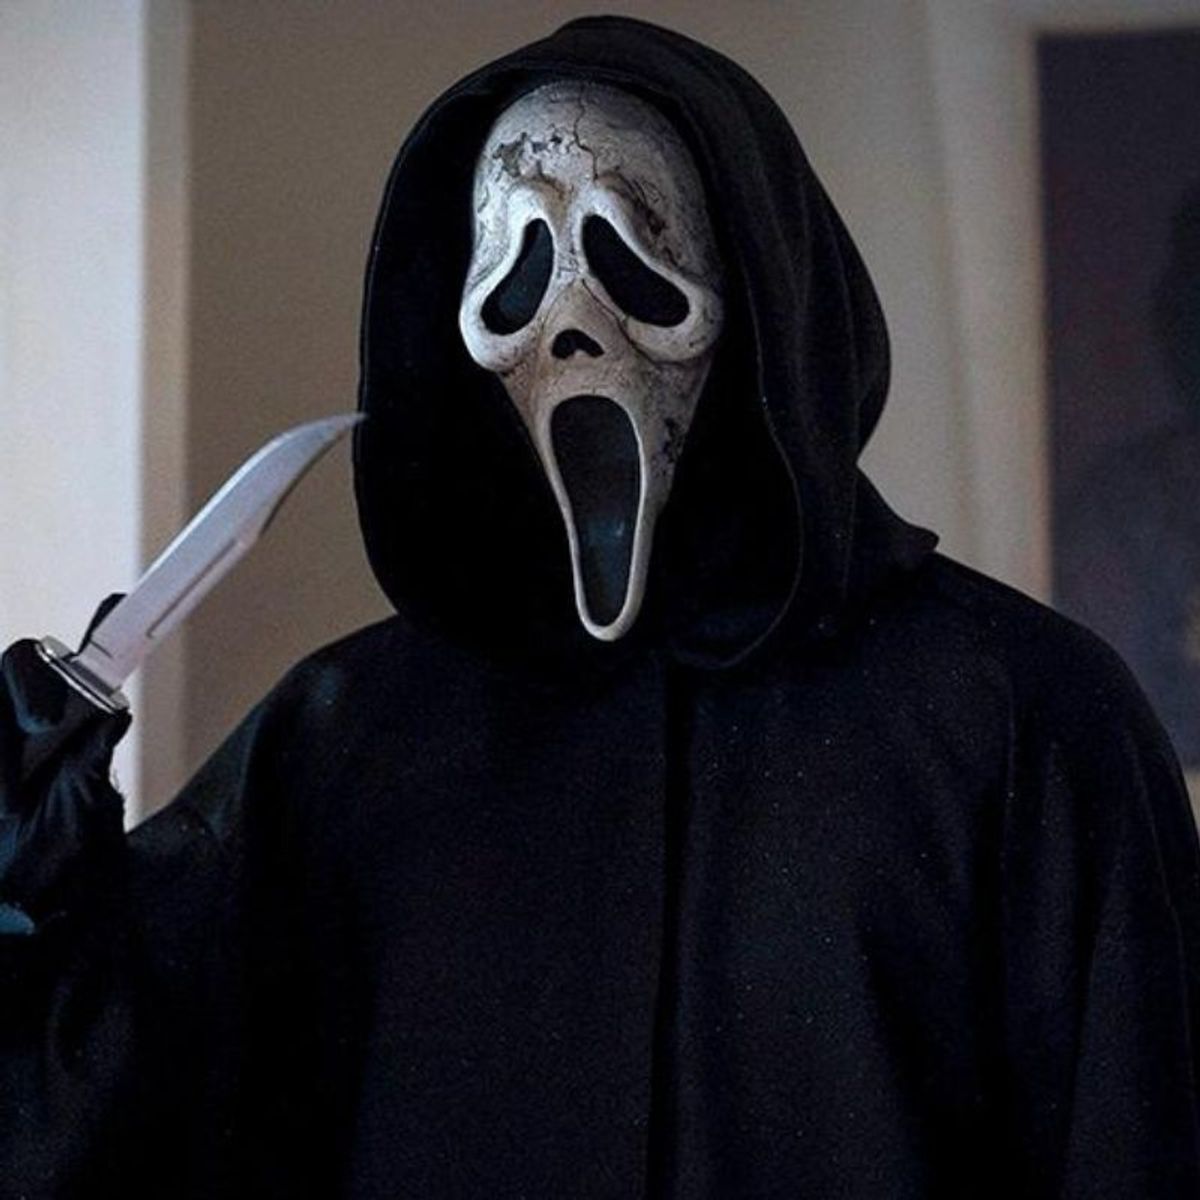 Scream 7' is confirmed, and here is everything we know about the